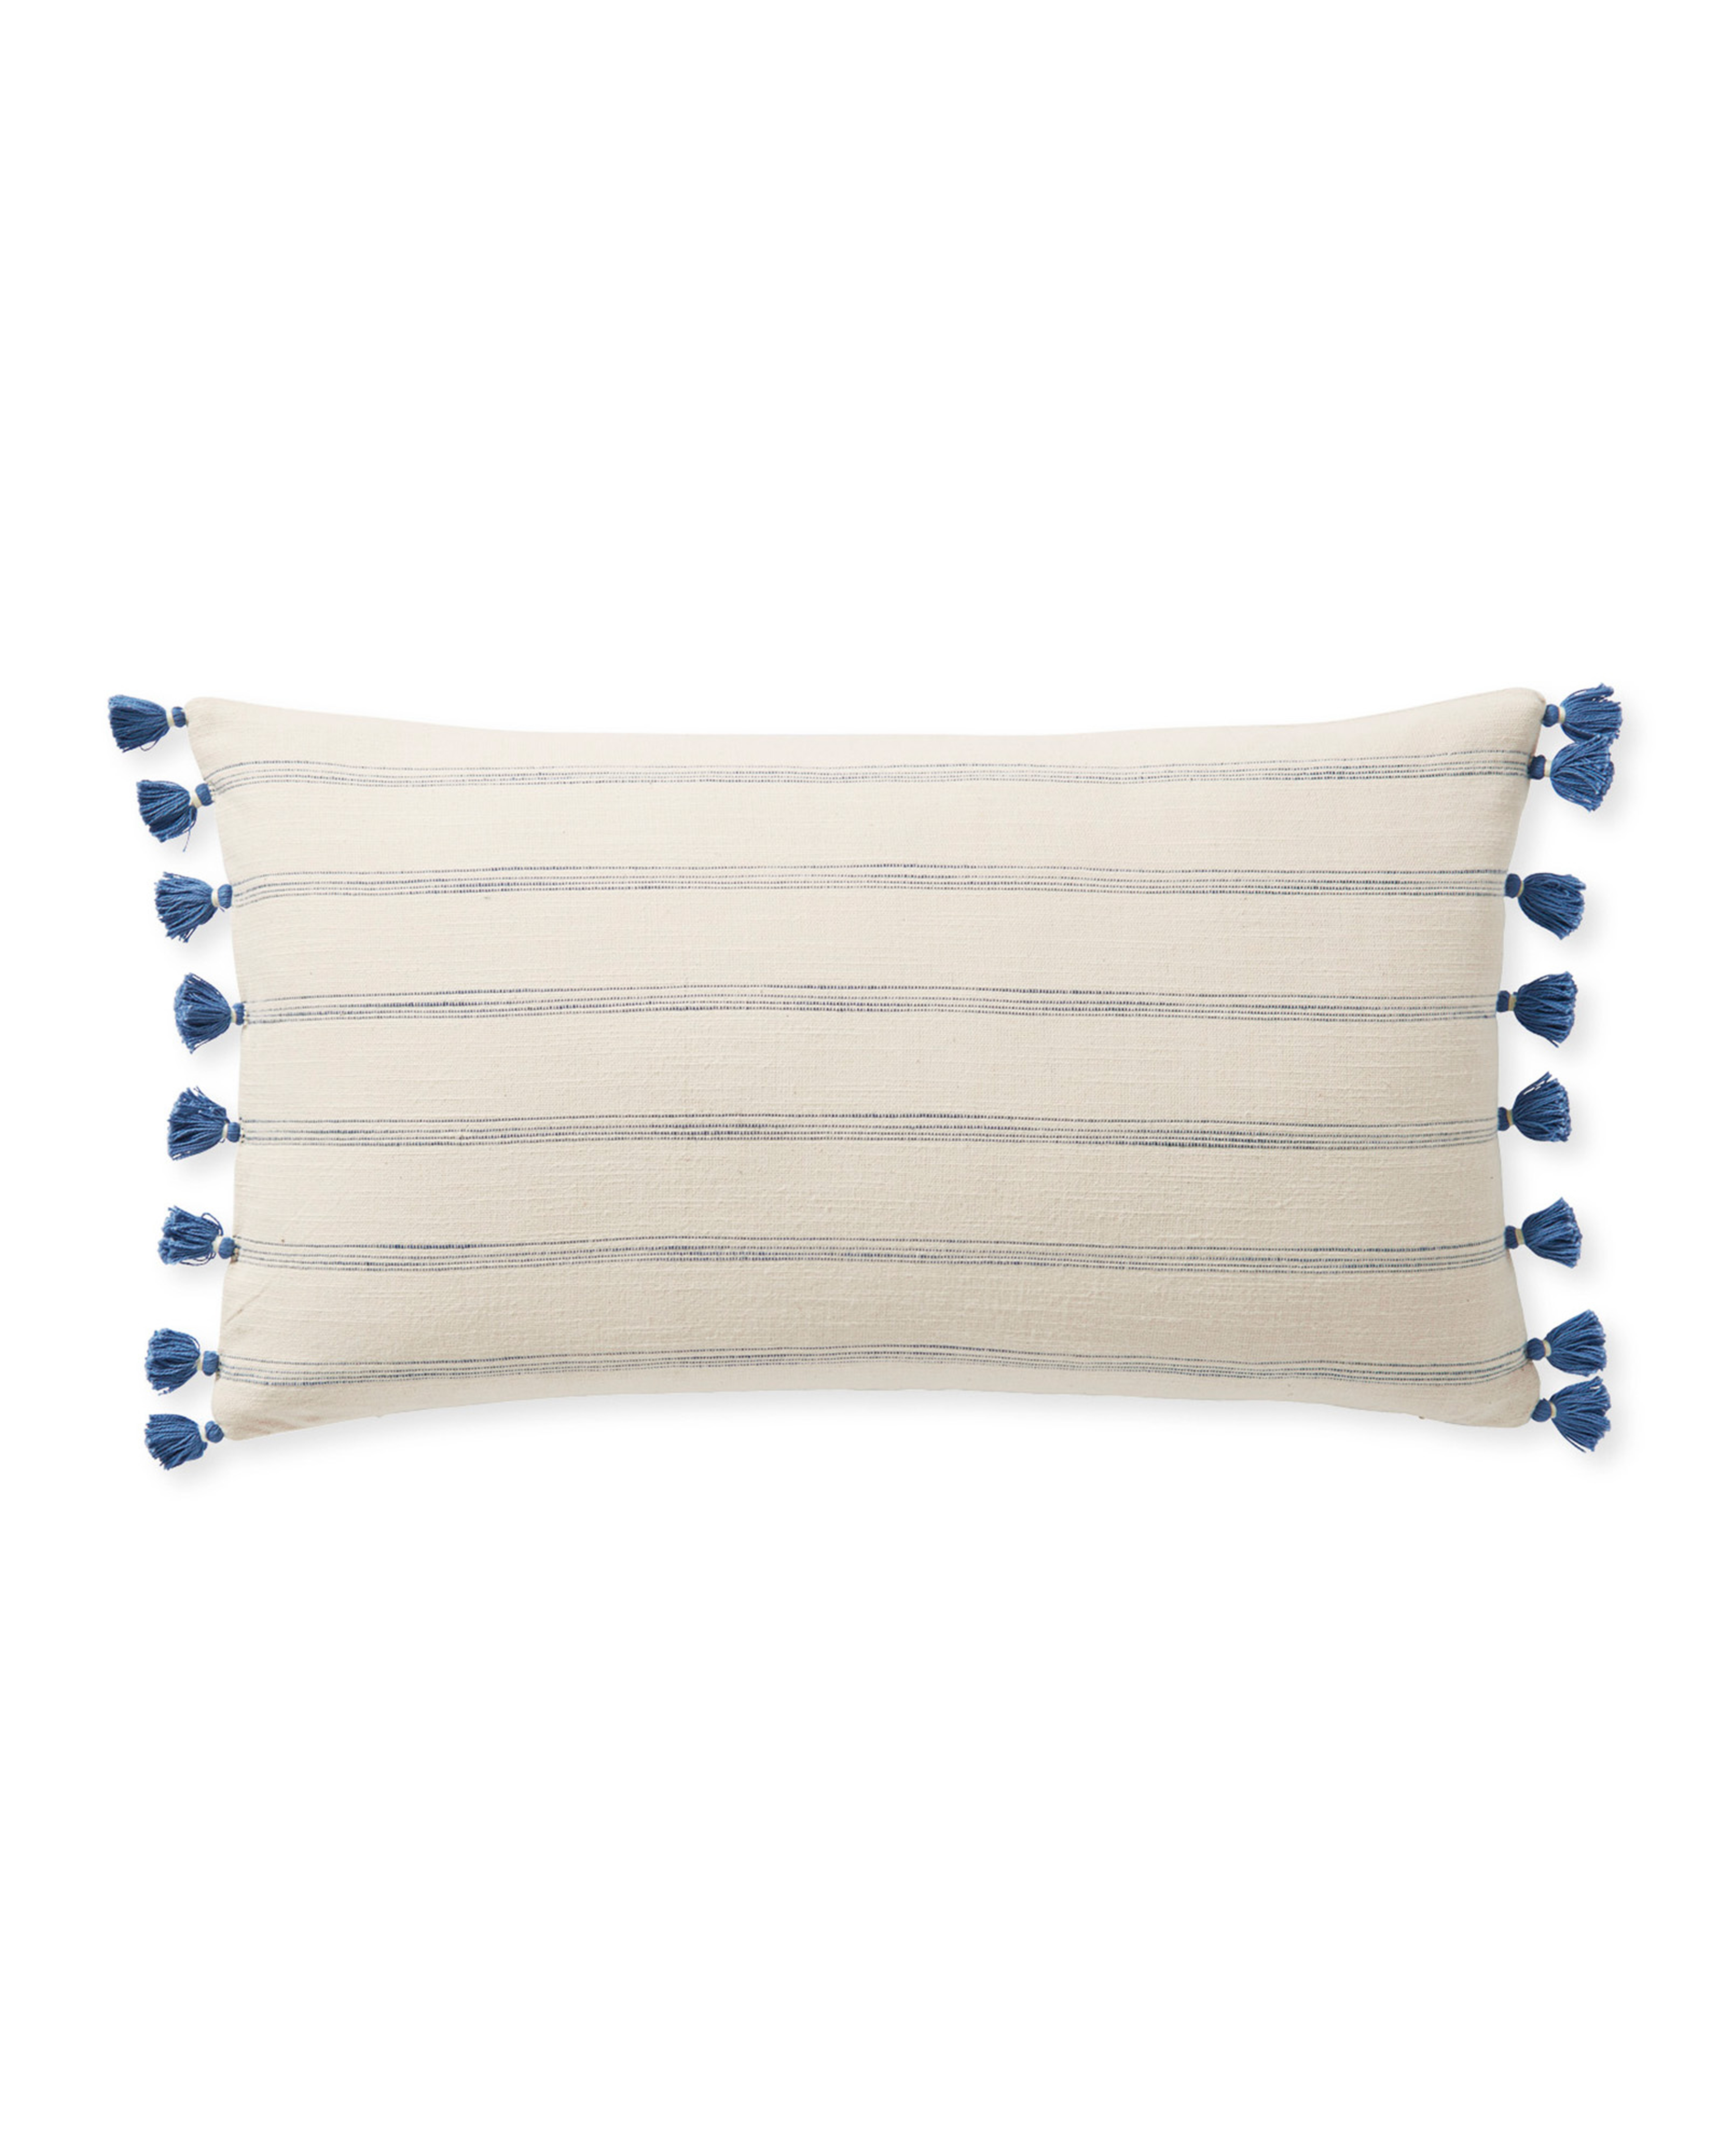 Alsworth 12" x 21" Pillow Cover - Washed Indigo - Insert sold separately - Serena and Lily